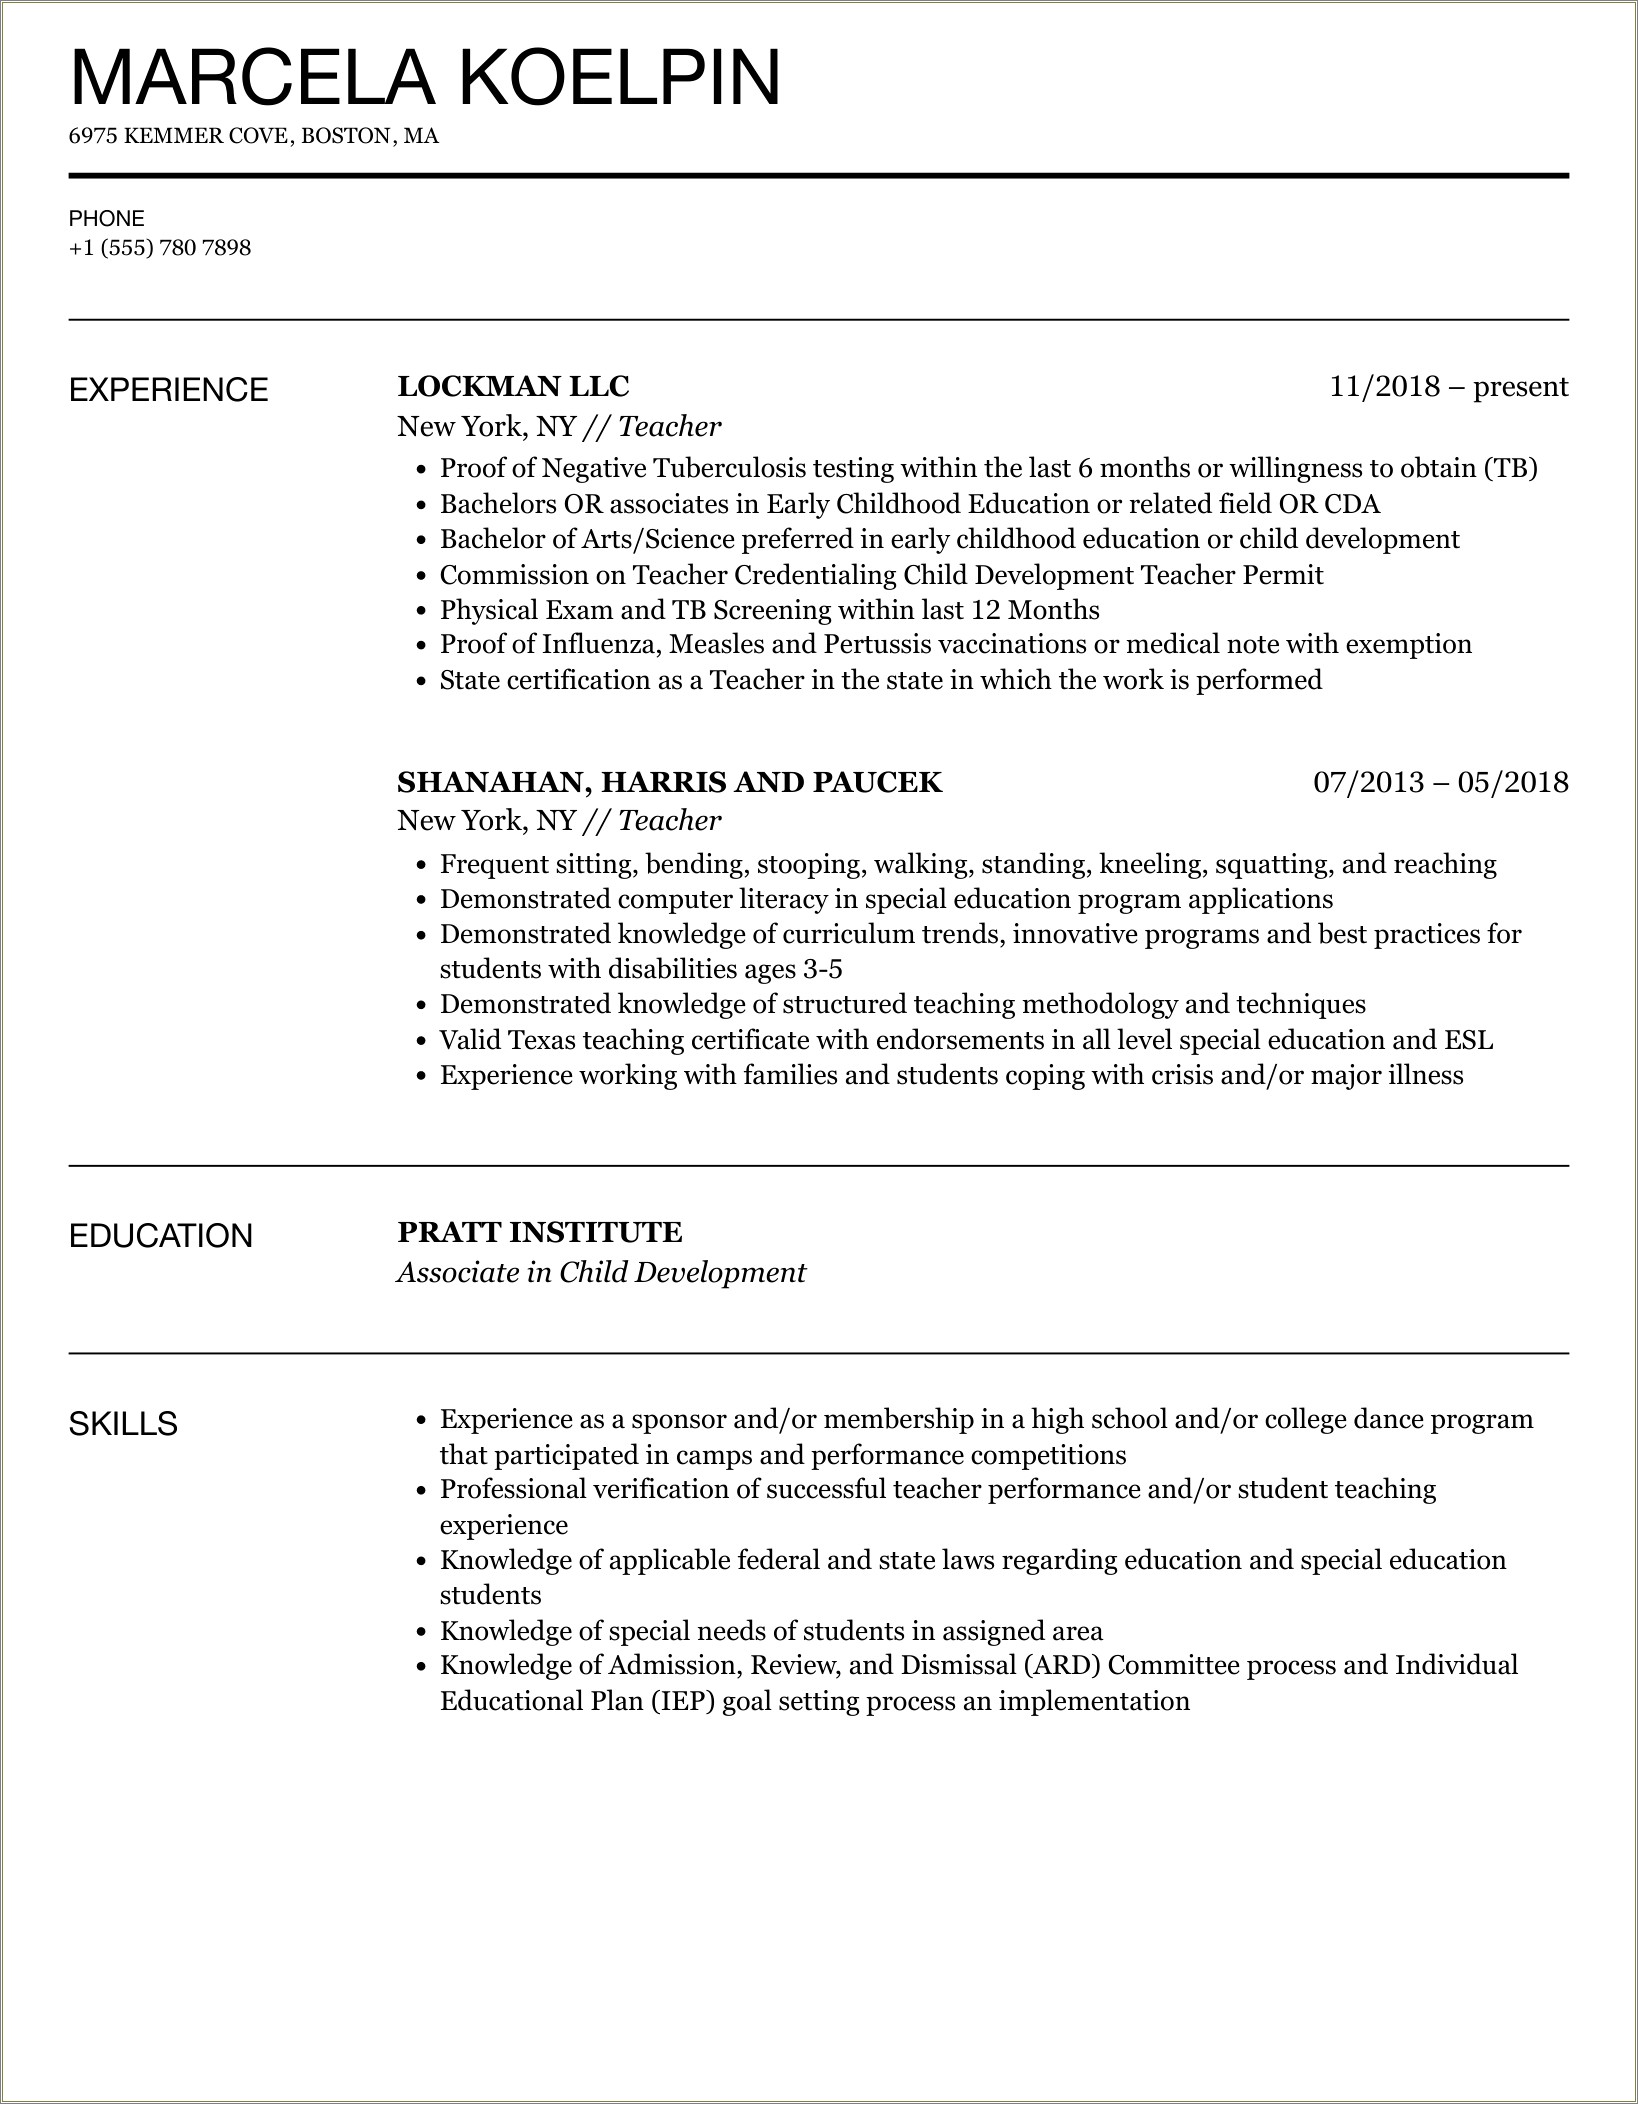 Resume Objective Statements For College Educators